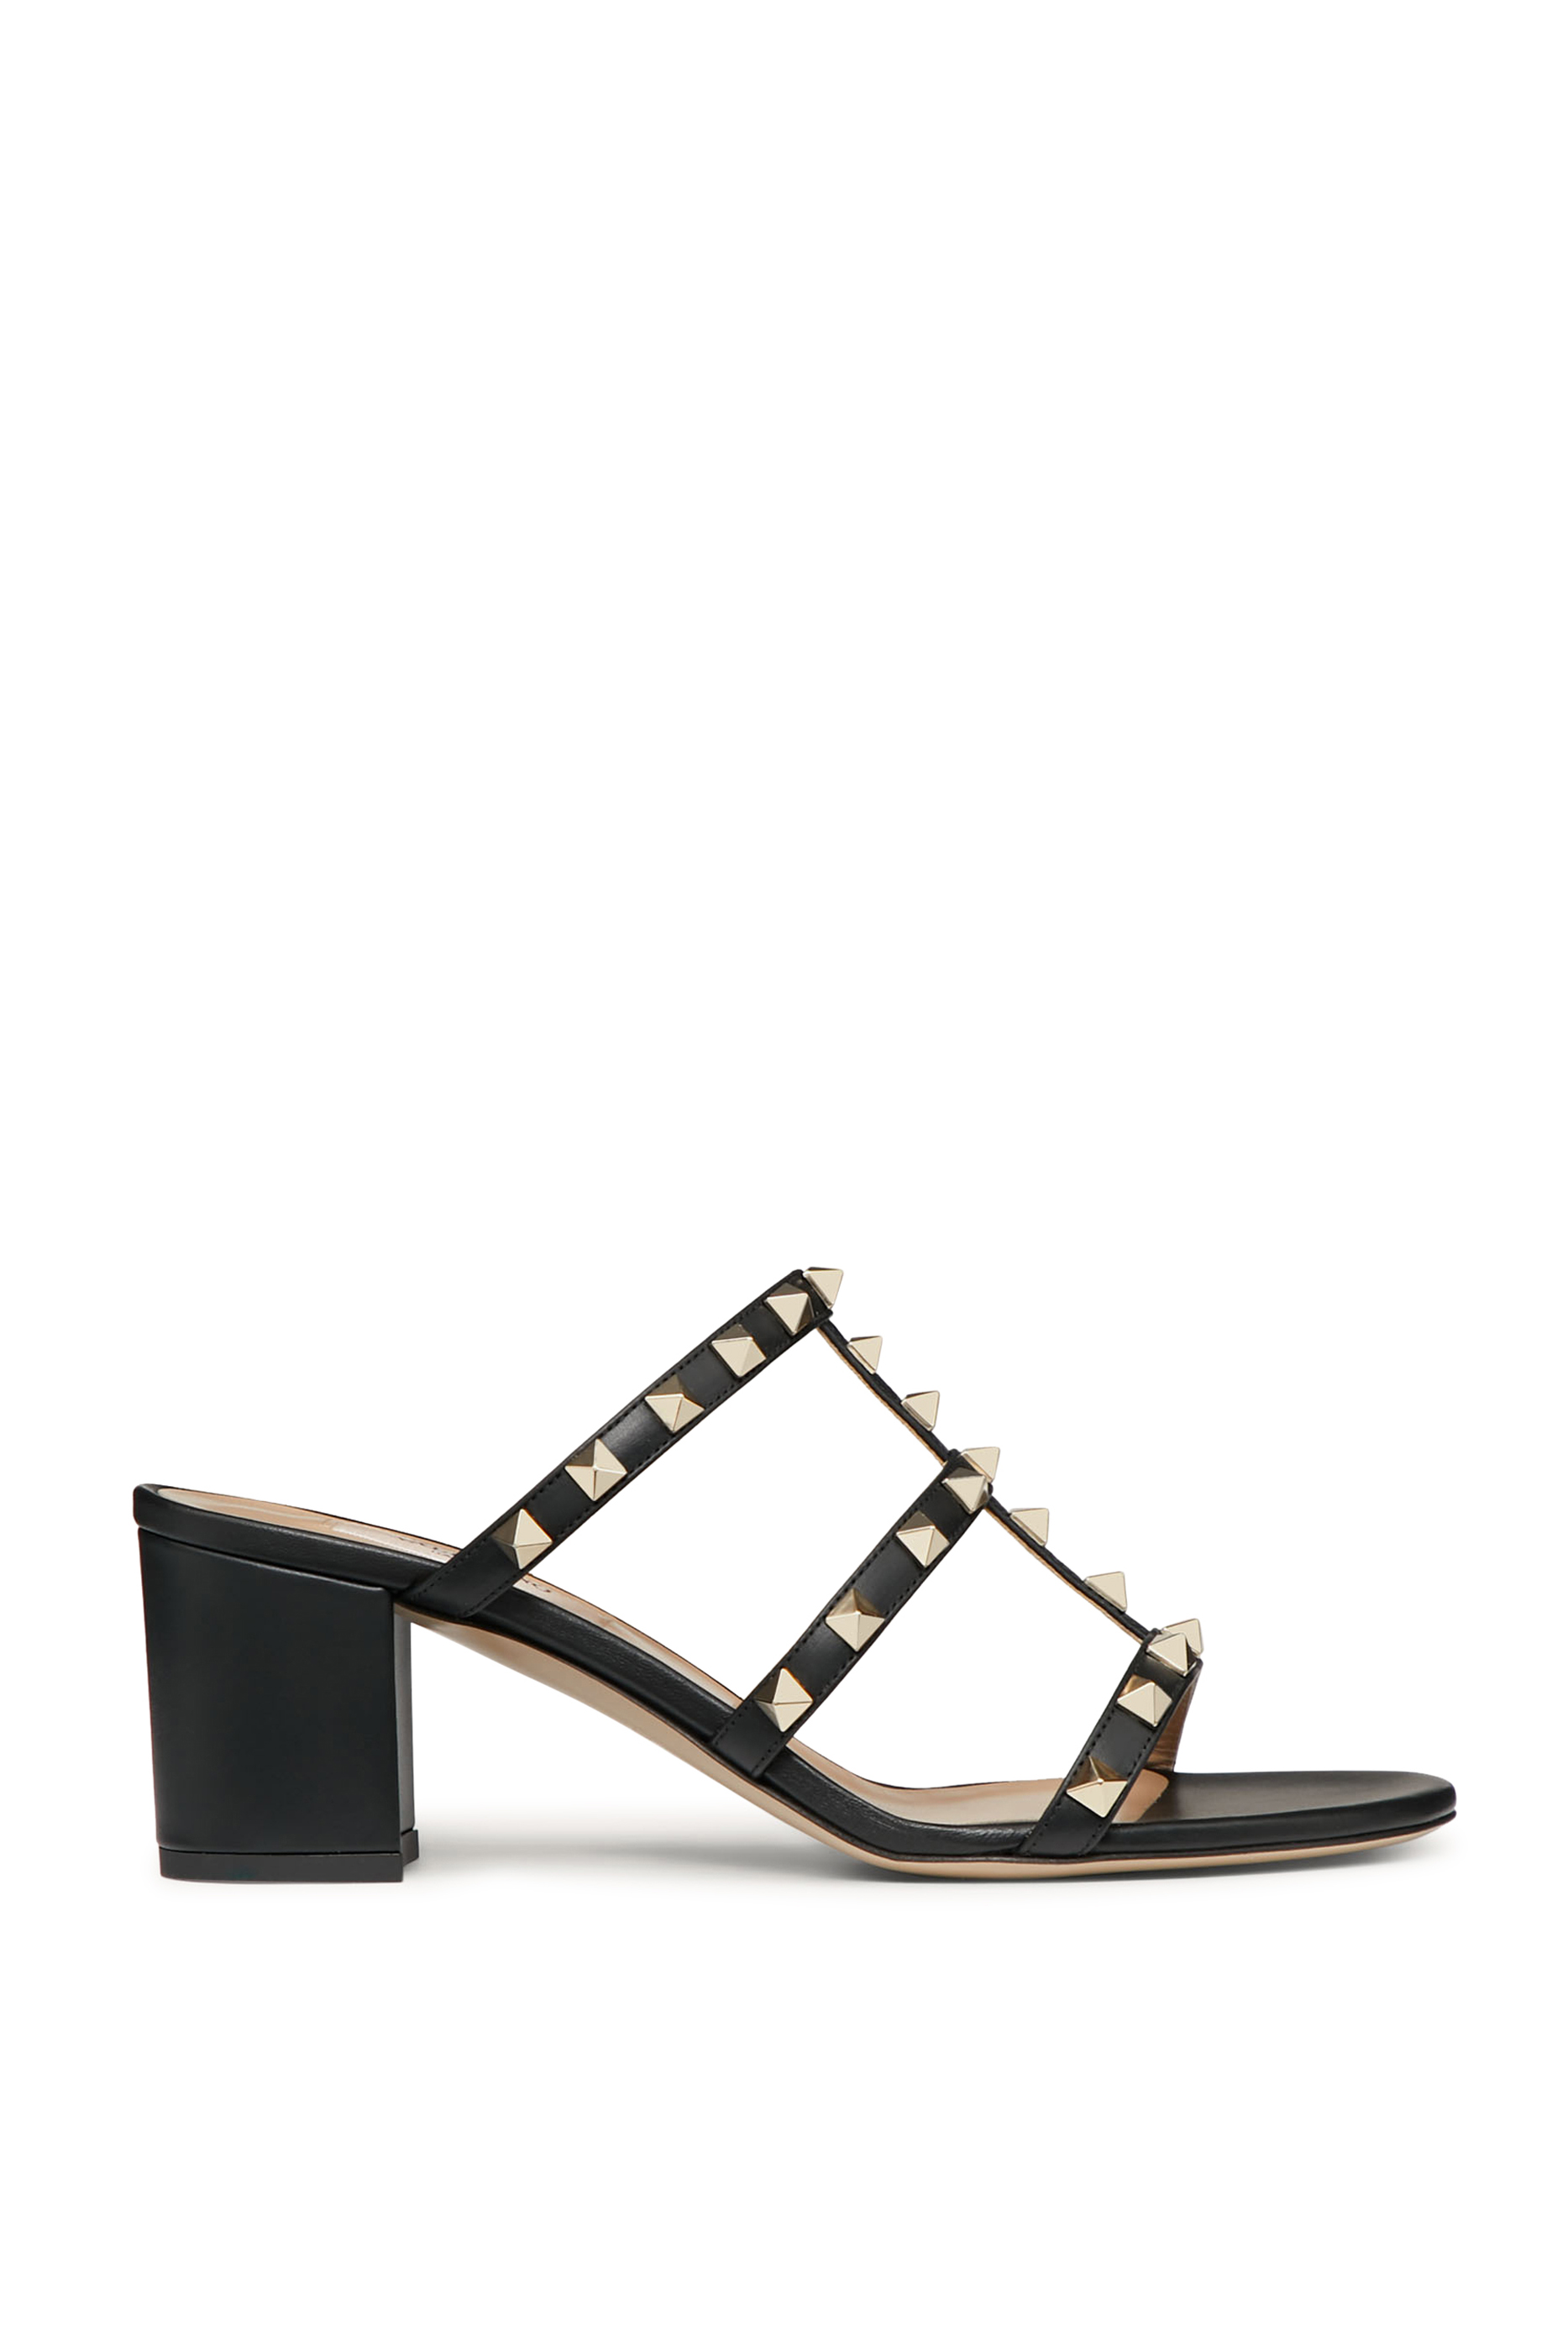 Buy Valentino Rockstud Leather Slides for Womens | Bloomingdale's Kuwait